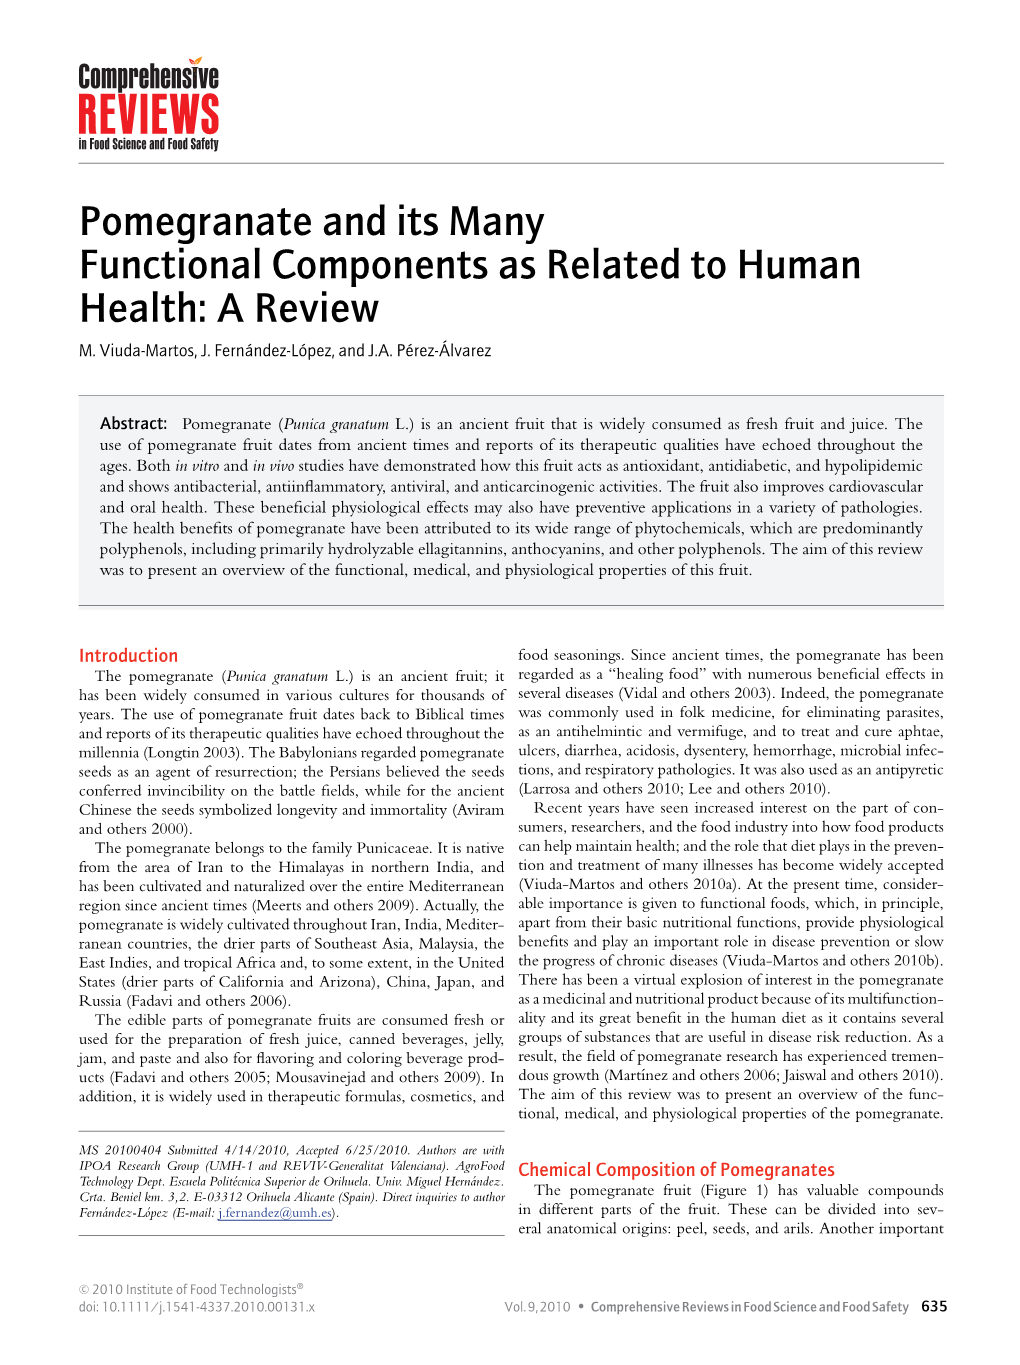 Pomegranate and Its Many Functional Components As Related to Human Health: a Review M